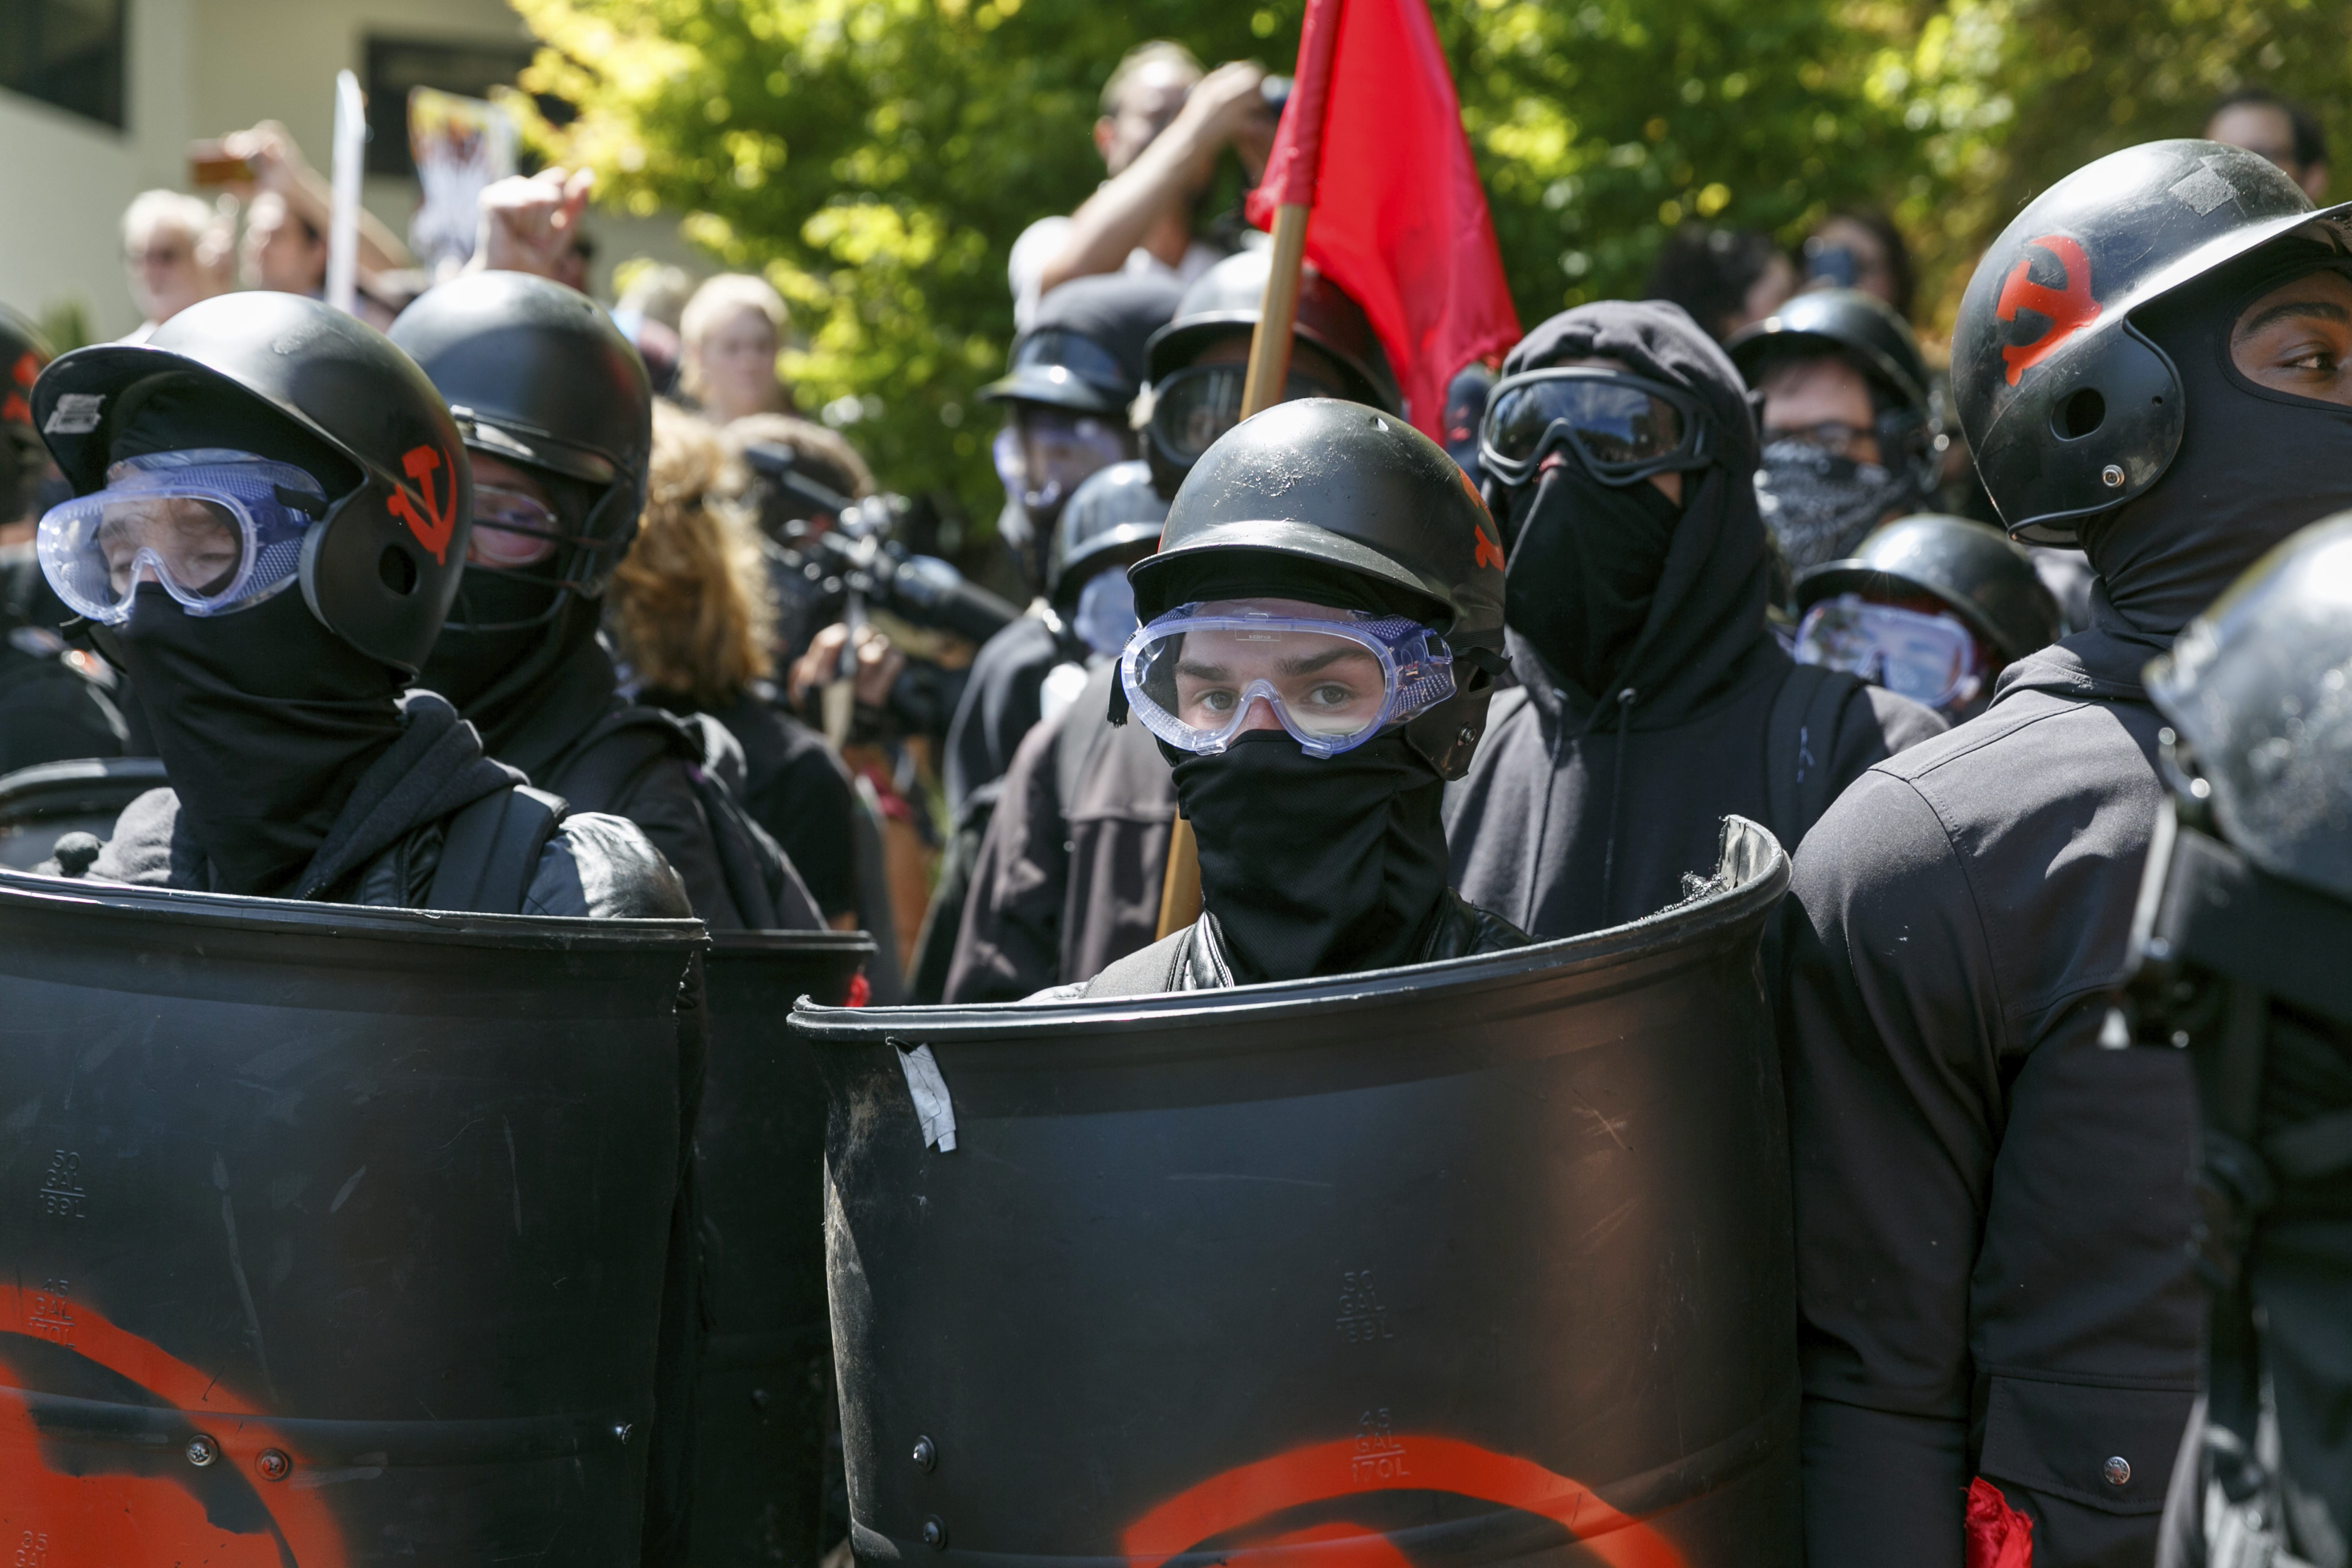 FILE - In this Aug. 4, 2018, file photo, counter-protesters prepare to clash with Patriot Prayer protesters during a rally in Portland, Ore. Portland police are mobilizing in hopes of avoiding clashes between out-of-state hate groups planning a rally Saturday, Aug. 17, 2019, and homegrown anti-fascists who say they’ll come out to oppose them. Since President Donald Trump’s election, Portland has become a political arena for far-right and far-left groups to face off.